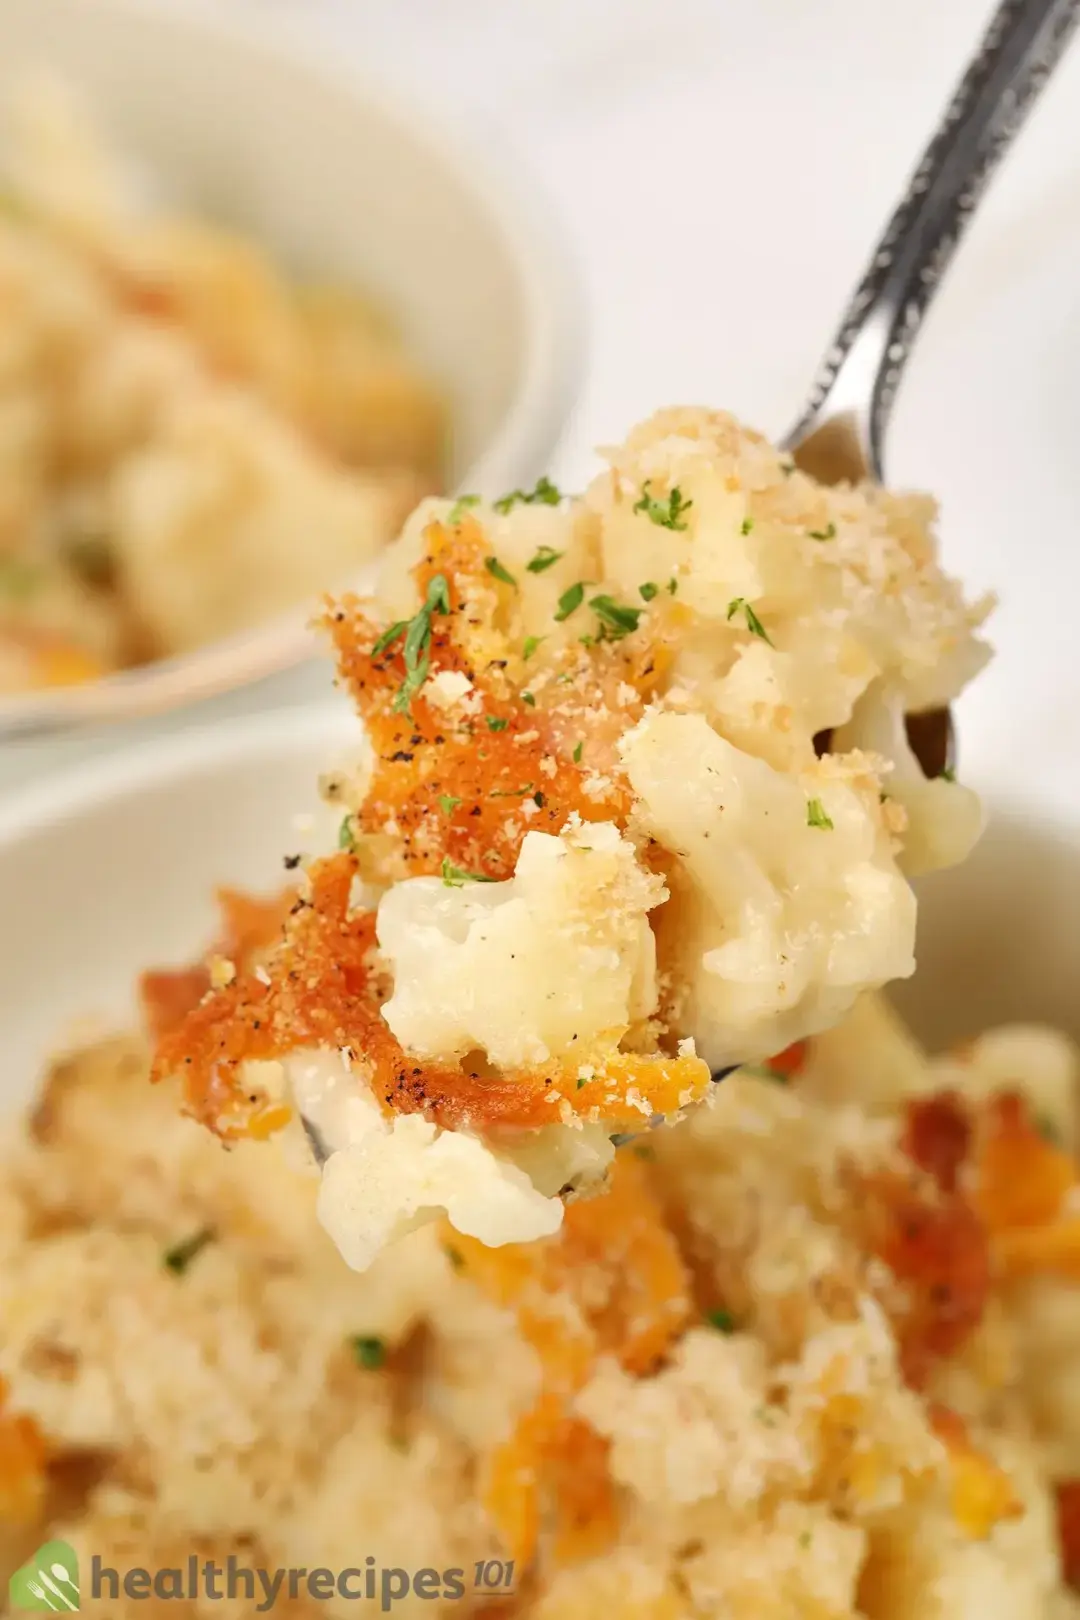 What Is the Best Cheese to Use for cauliflower mac and cheese